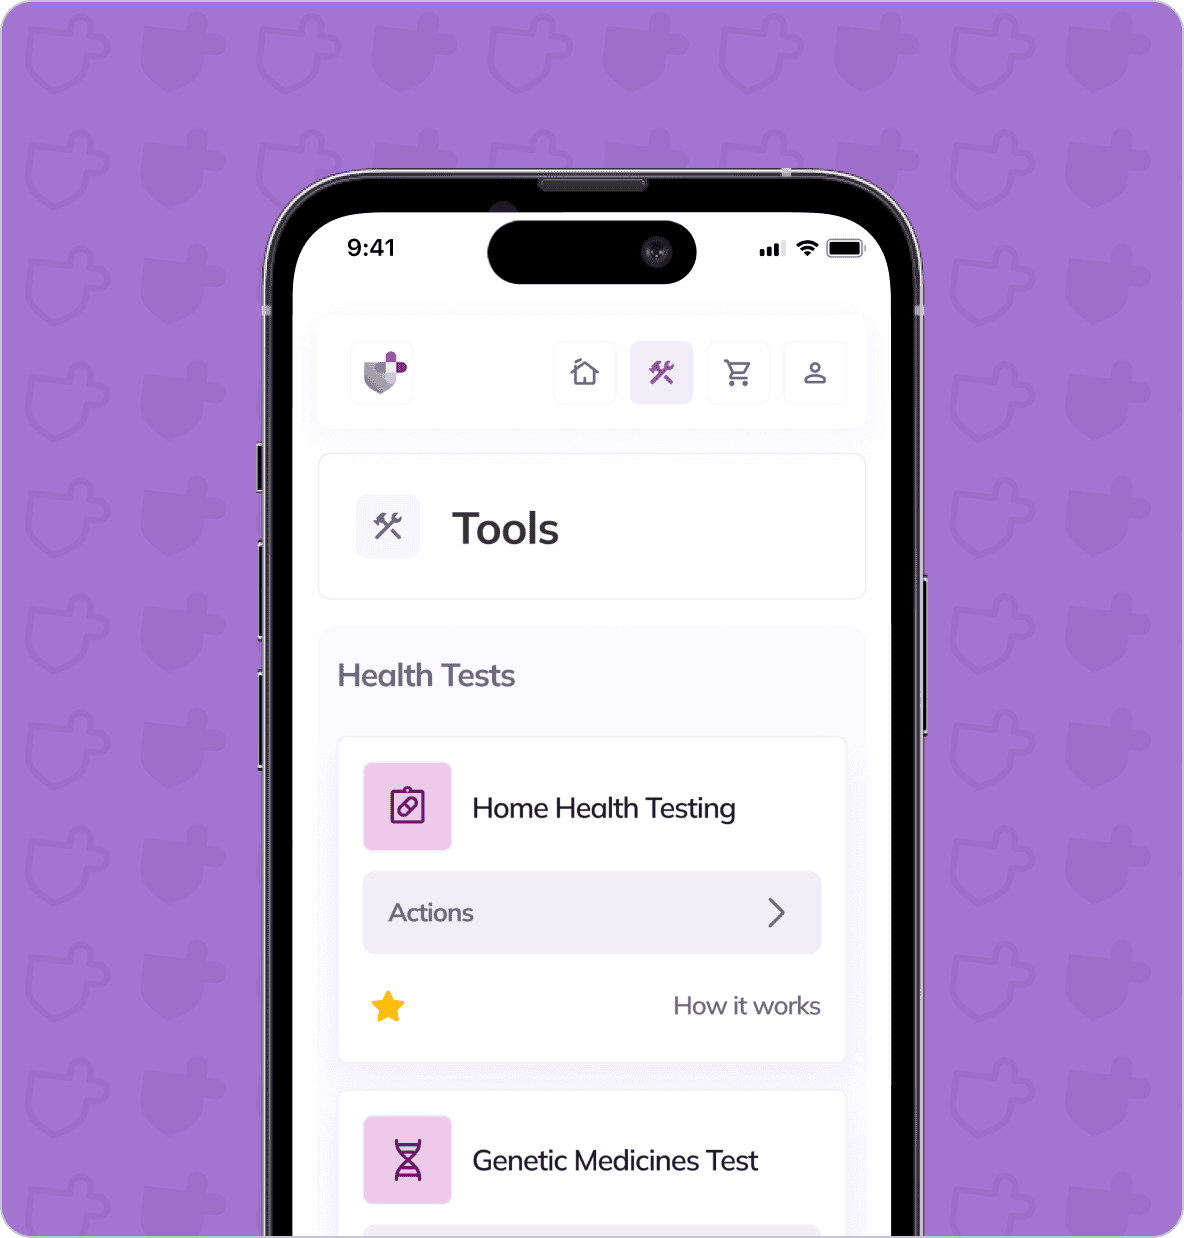 A smartphone screen displaying a health app interface with options for "Home Health Testing" and "Genetic Medicines Test" under the Tools section. The app has a purple background.